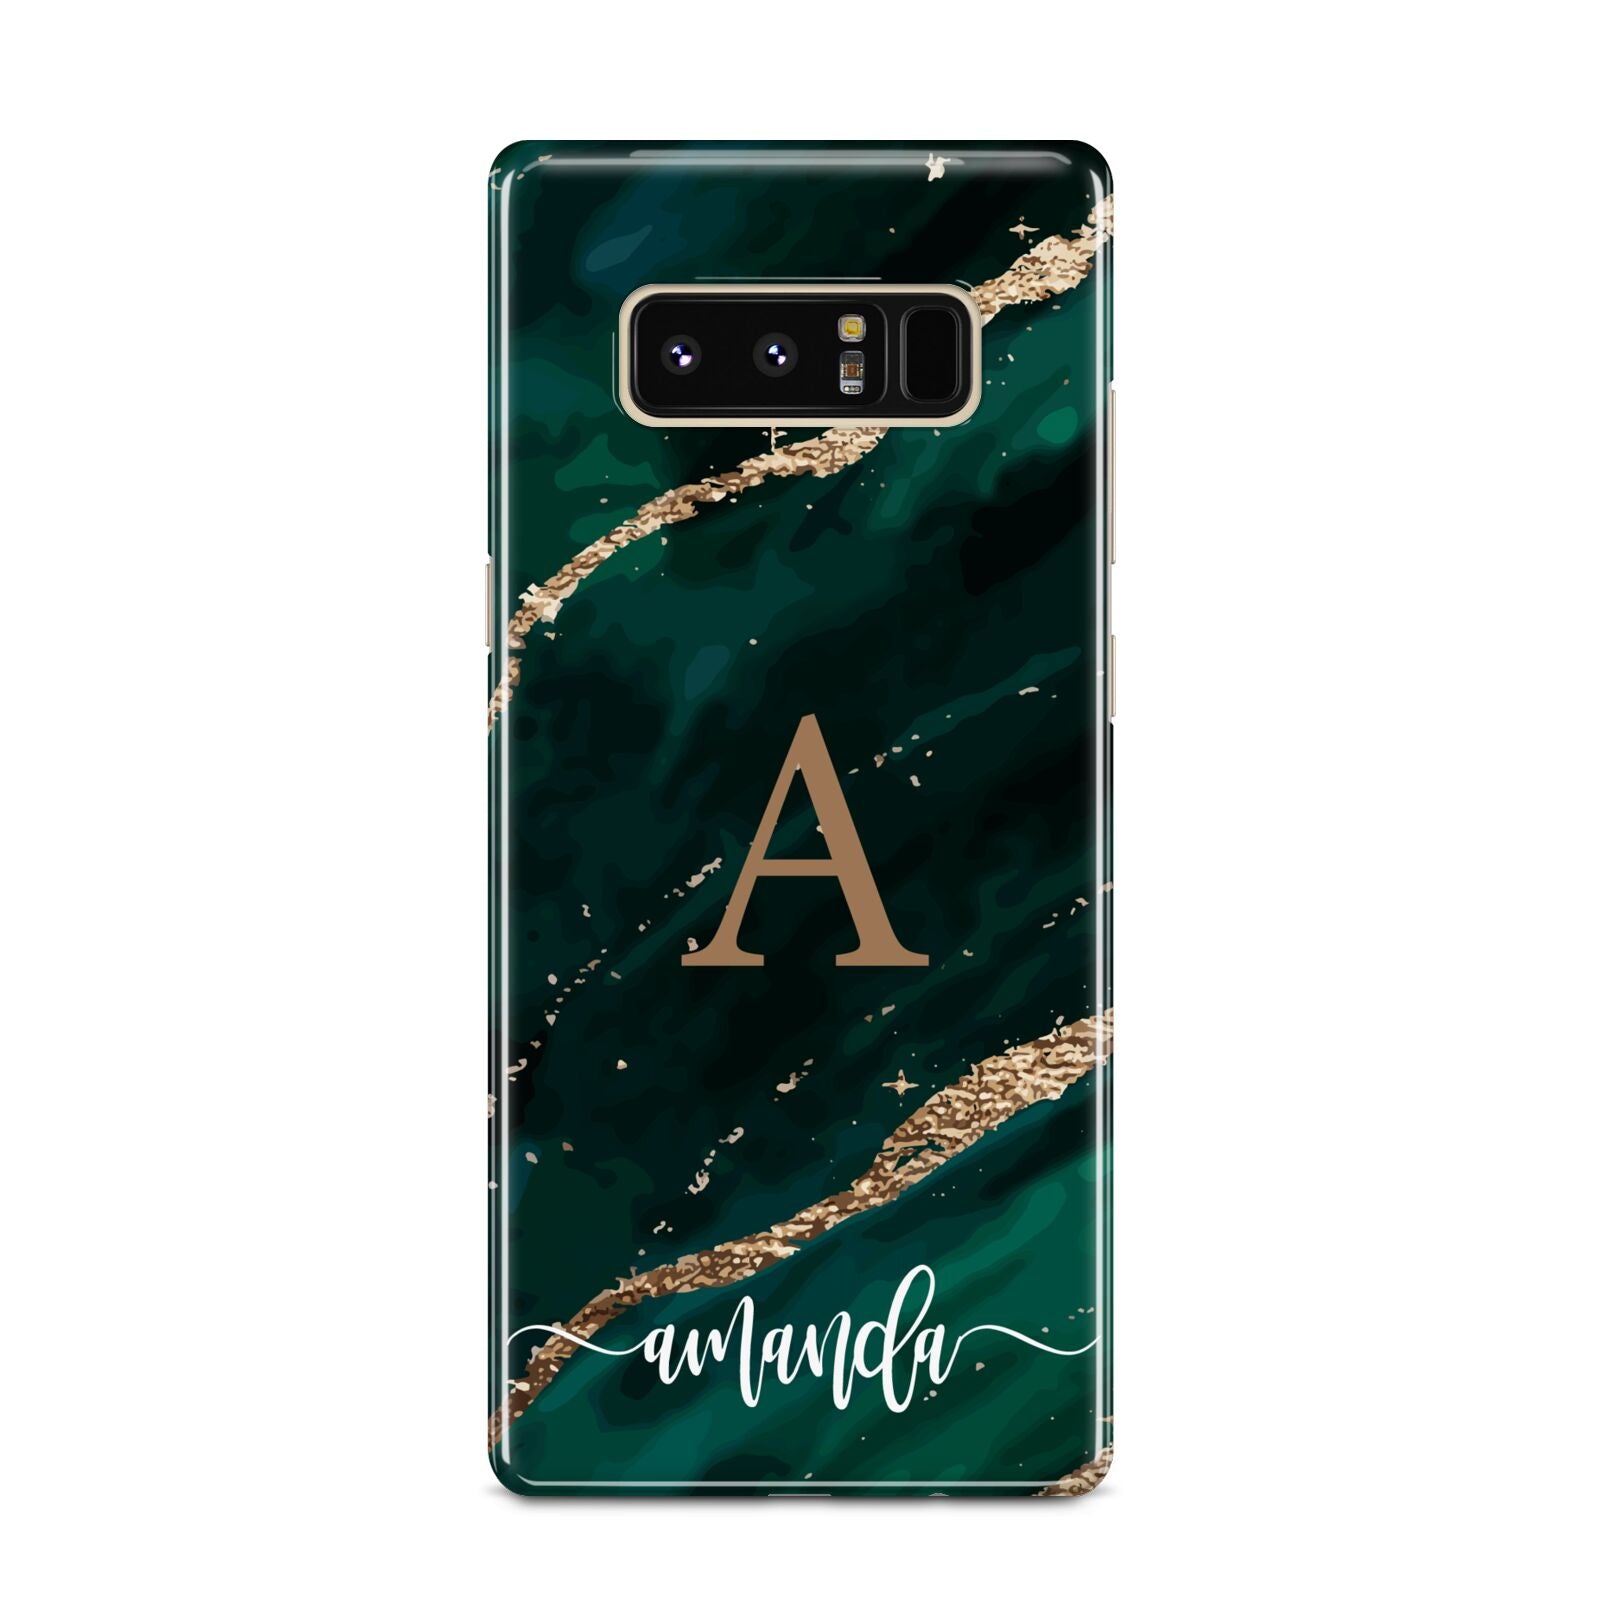 Green Marble Samsung Galaxy Note 8 Case